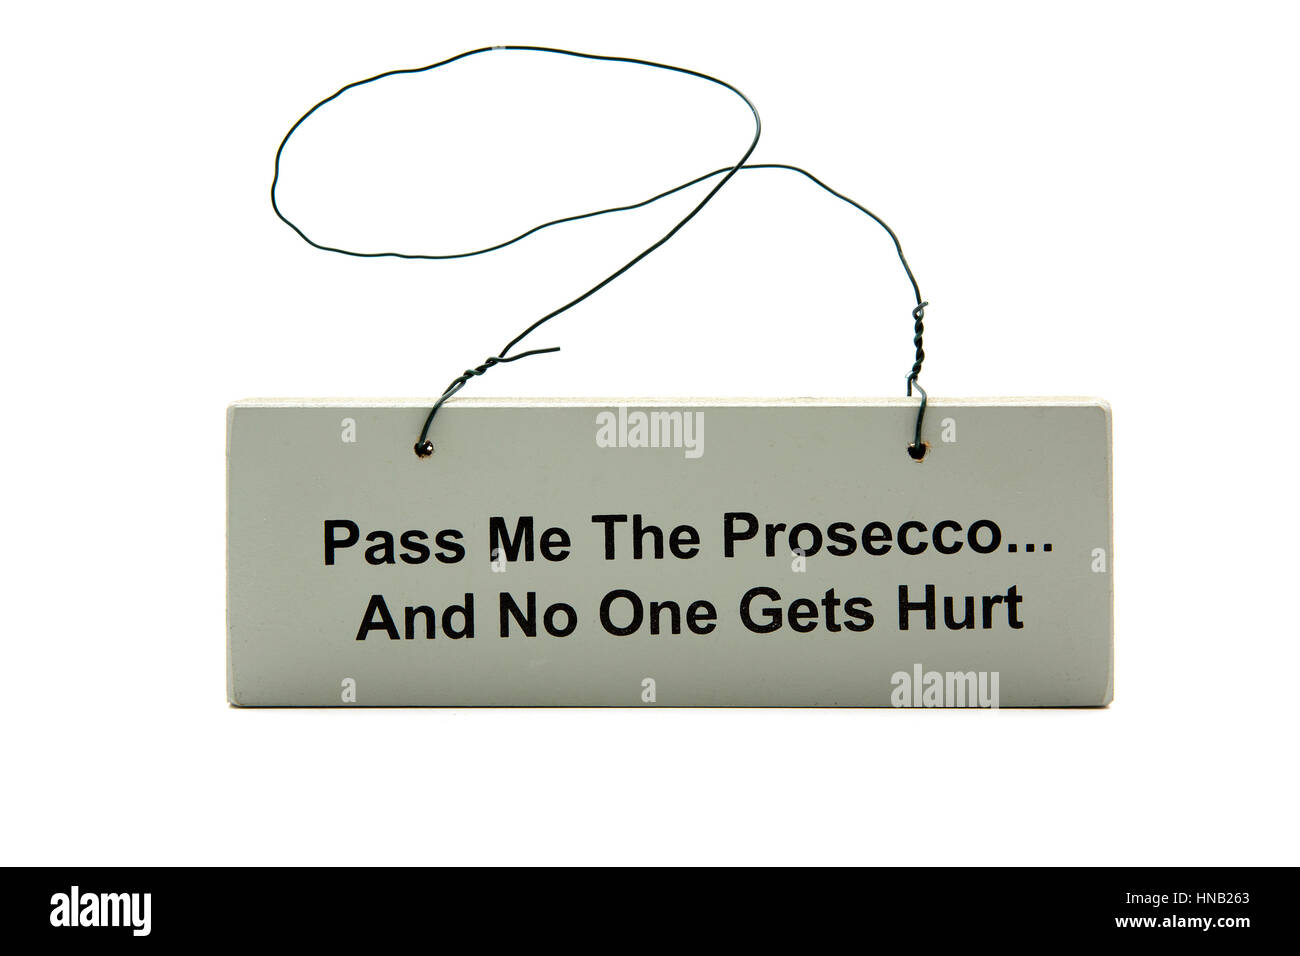 Hand made sign “Pass Me The Prosecco and No One Gets Hurt” Stock Photo